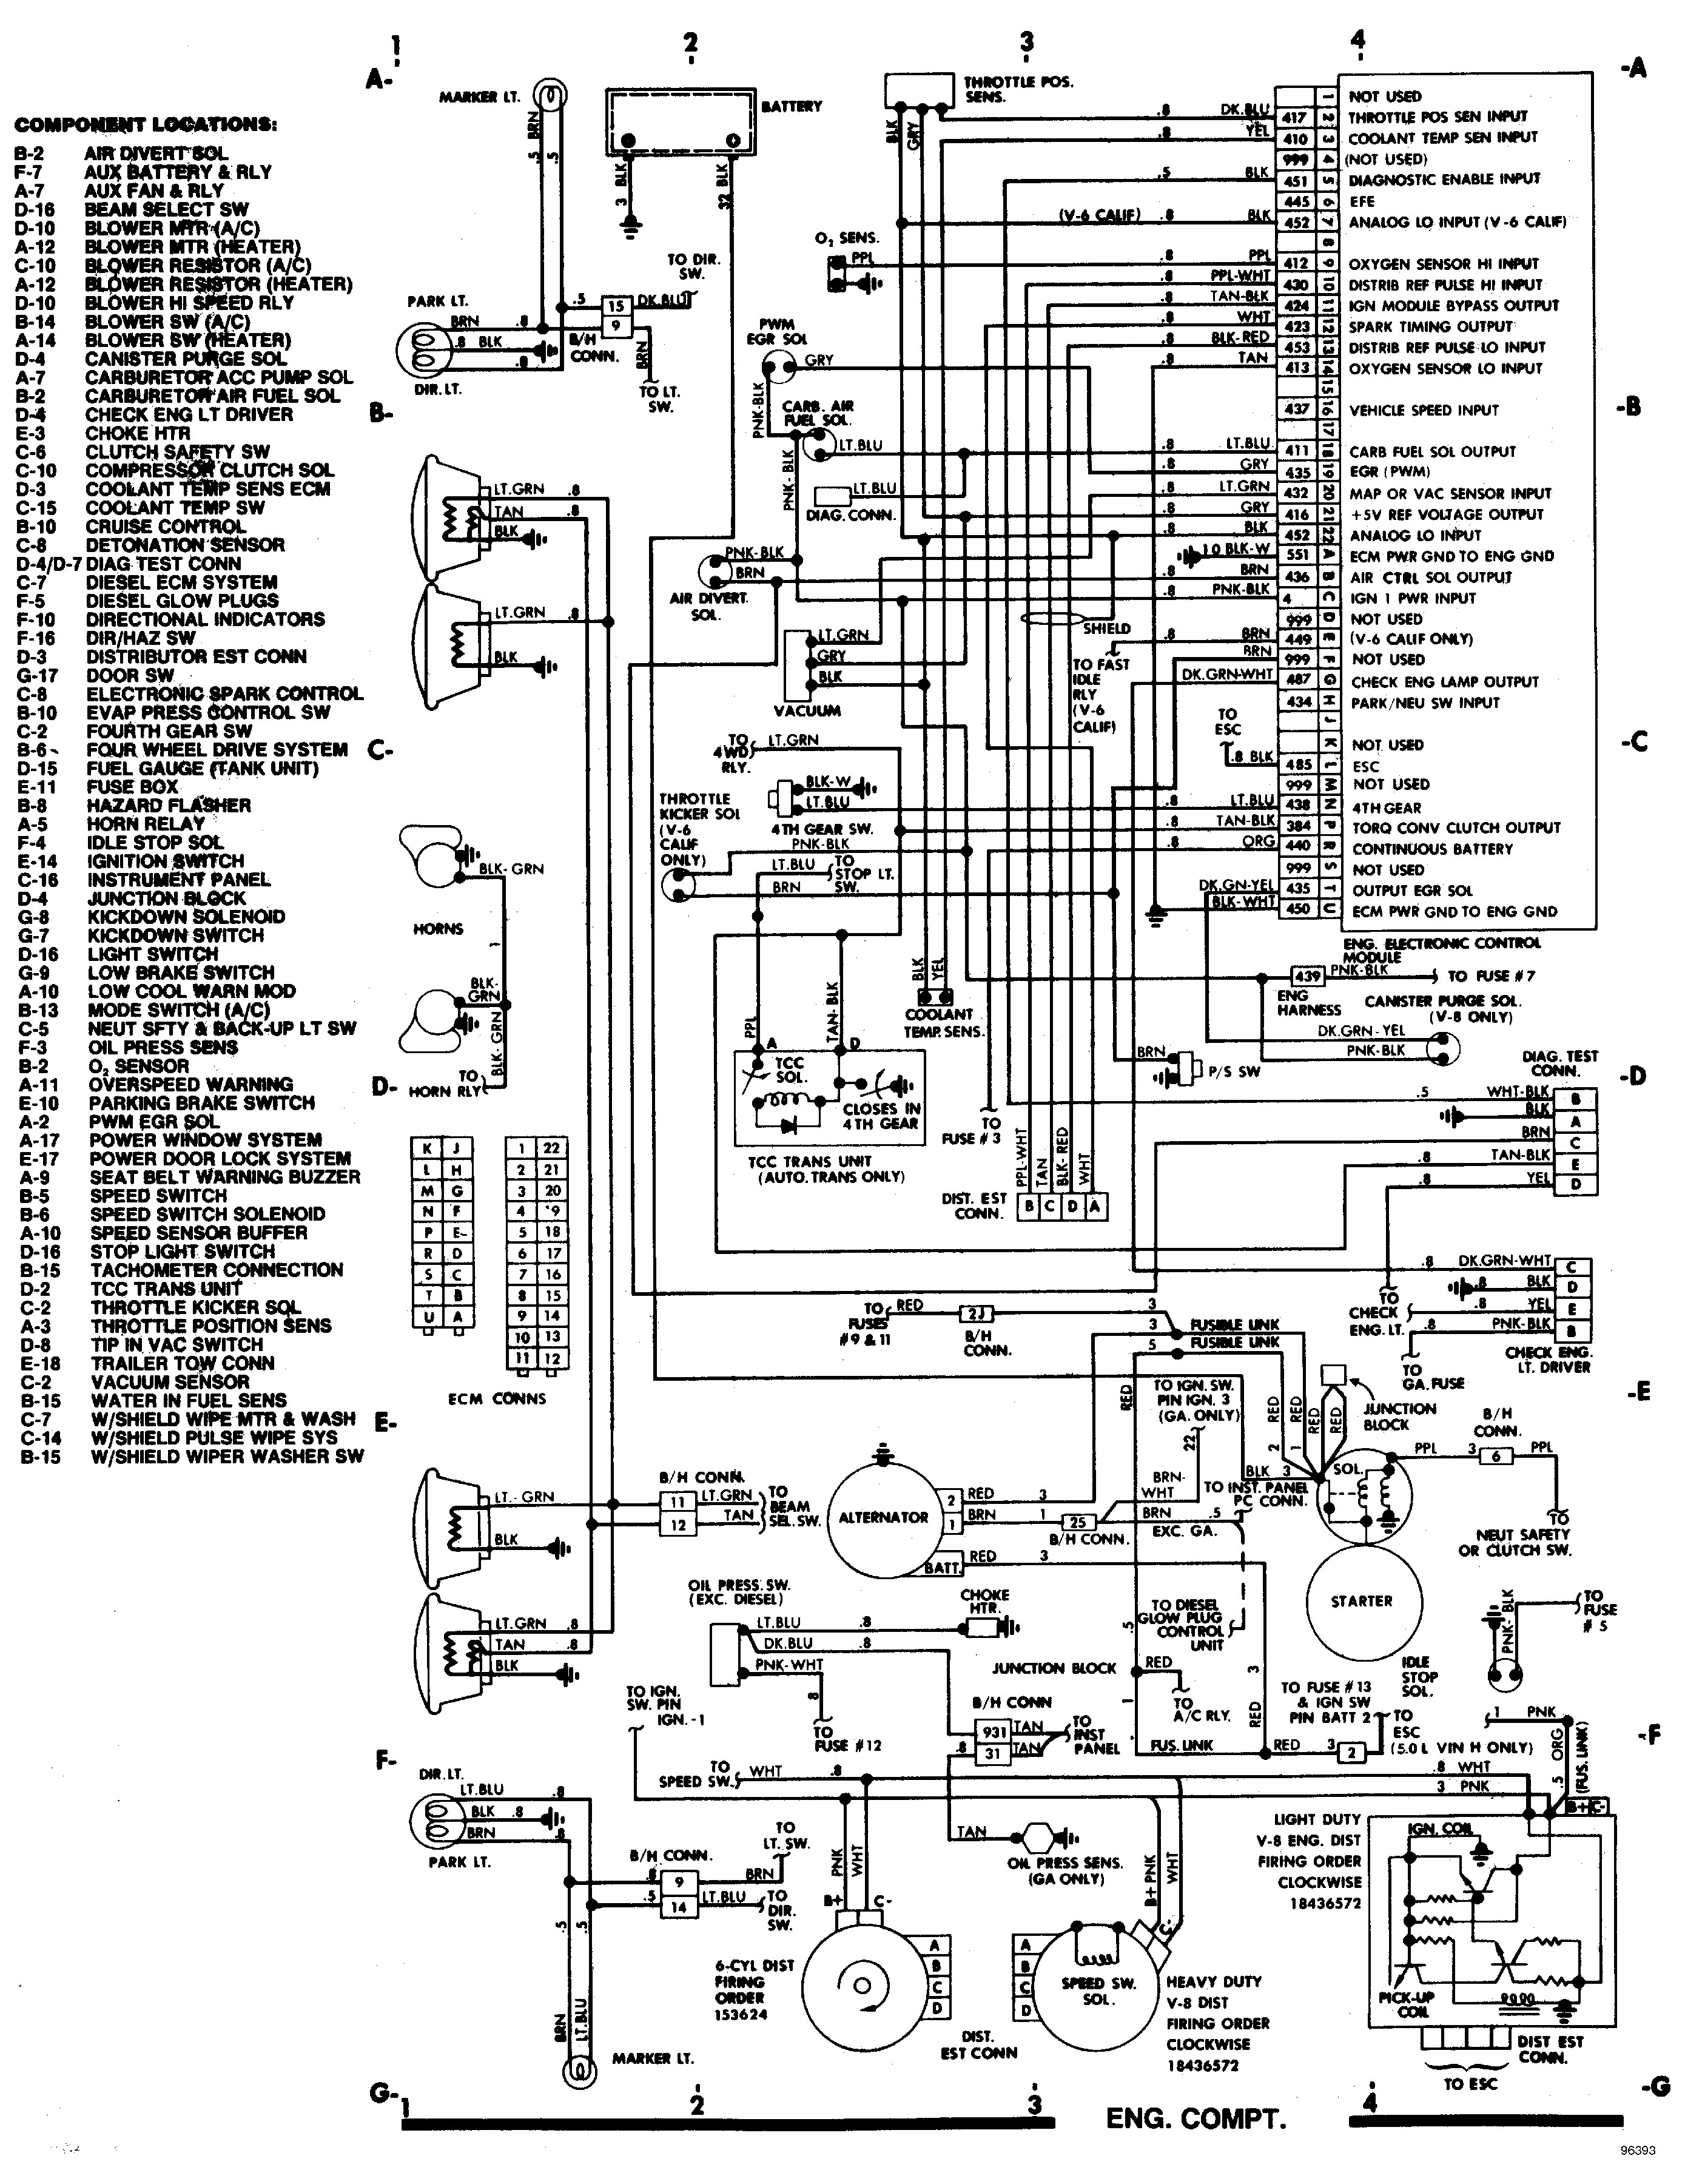 Wiring Diagrams for Trucks 85 Chevy Truck Wiring Diagram